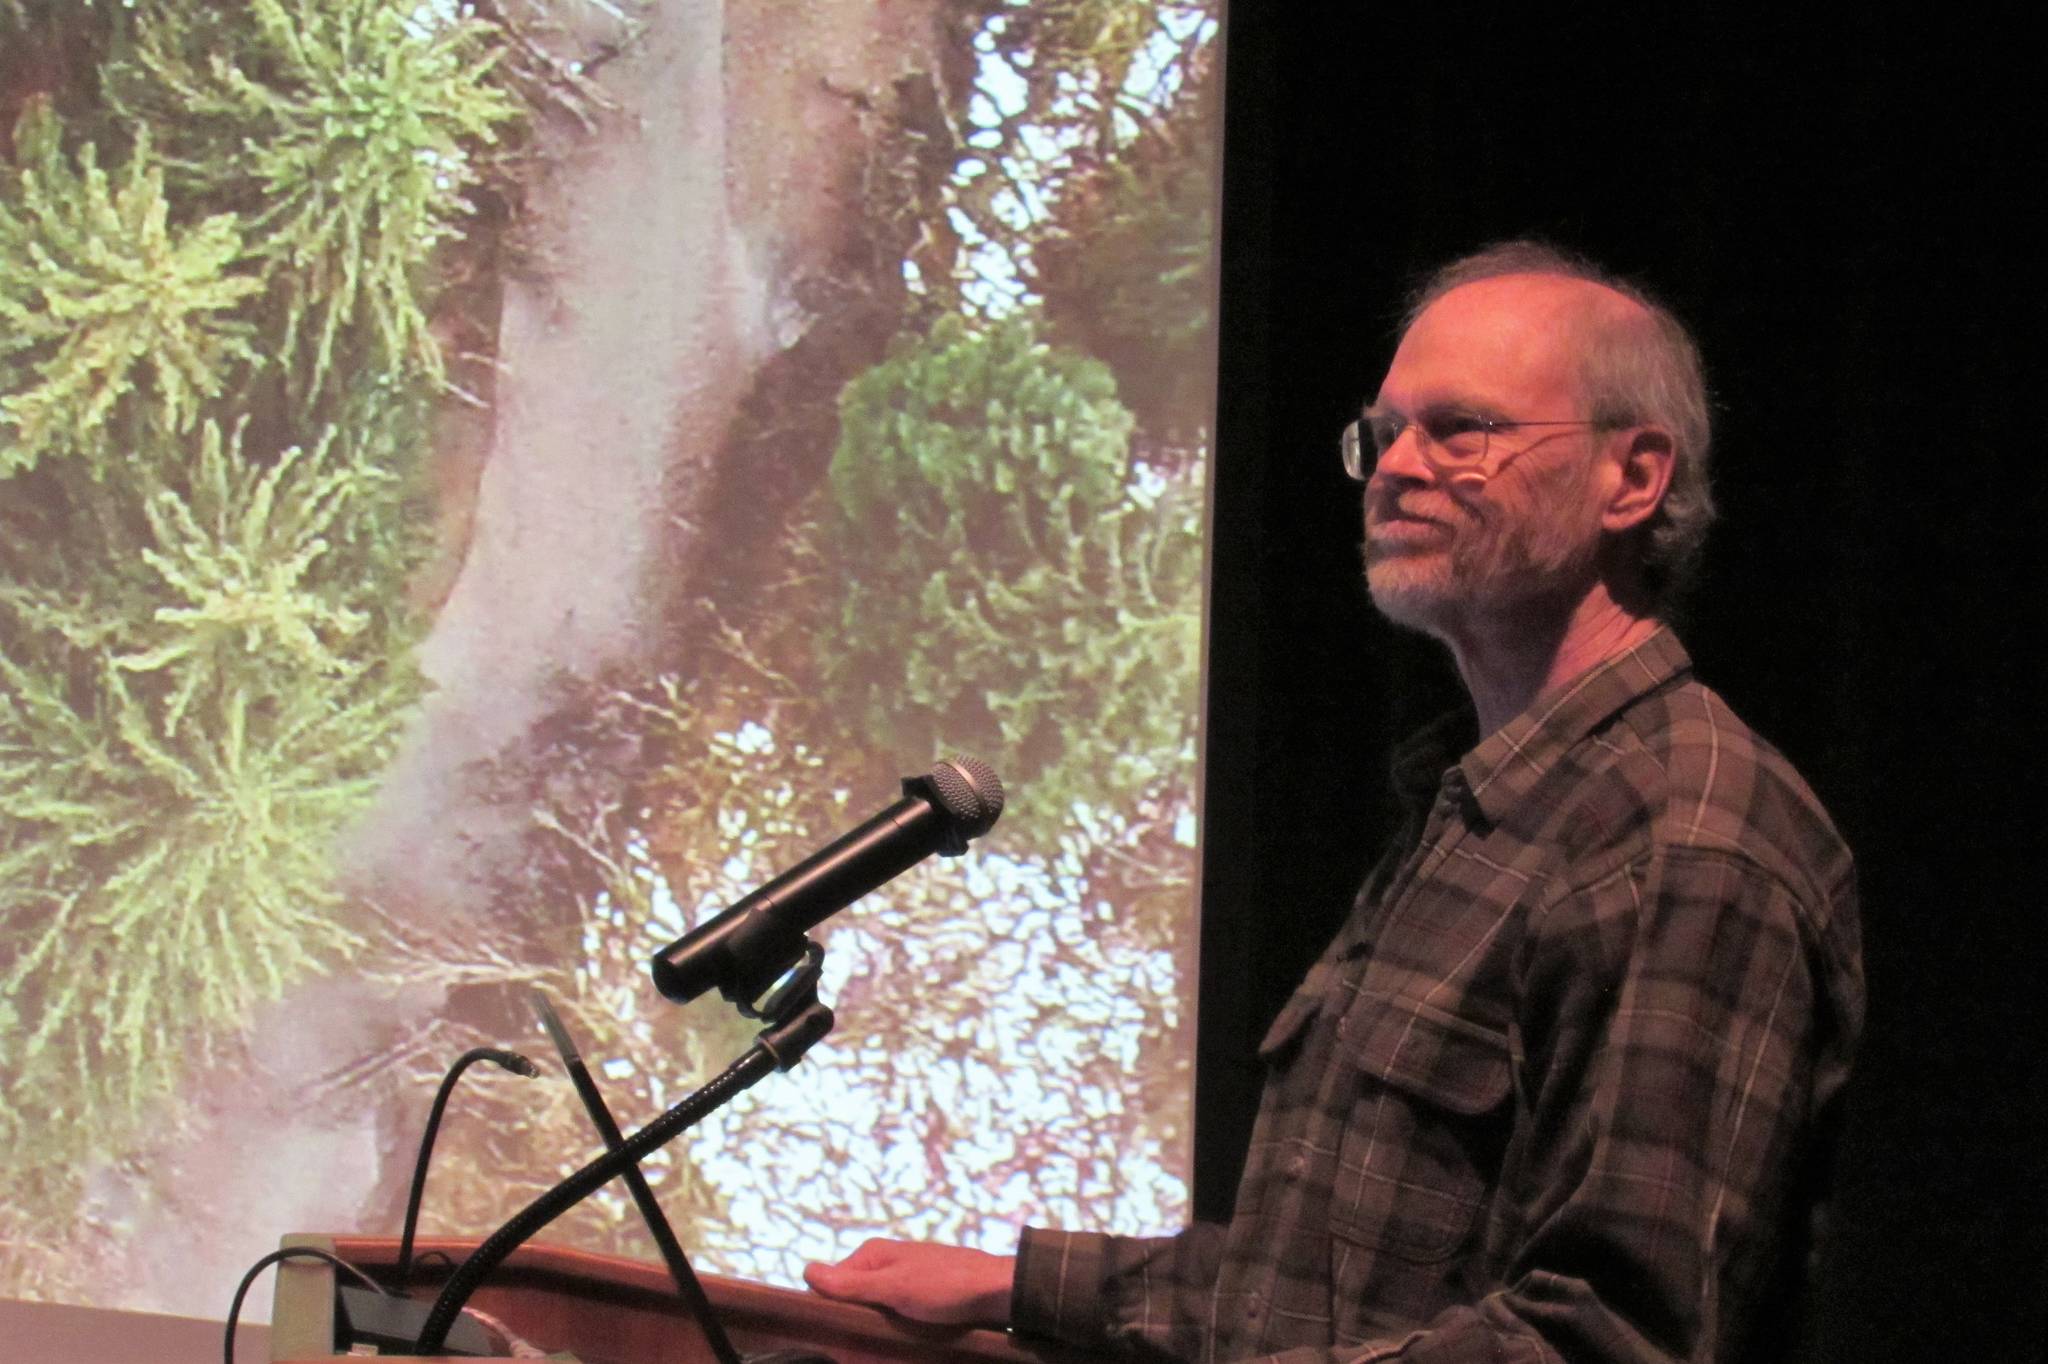 Richard Carstensen, lead naturalist for Discovery Southeast, speaks during a presentation about the Kaxdigoowu Héen (Montana Creek) watershed Saturday, Jan. 12, 2019.